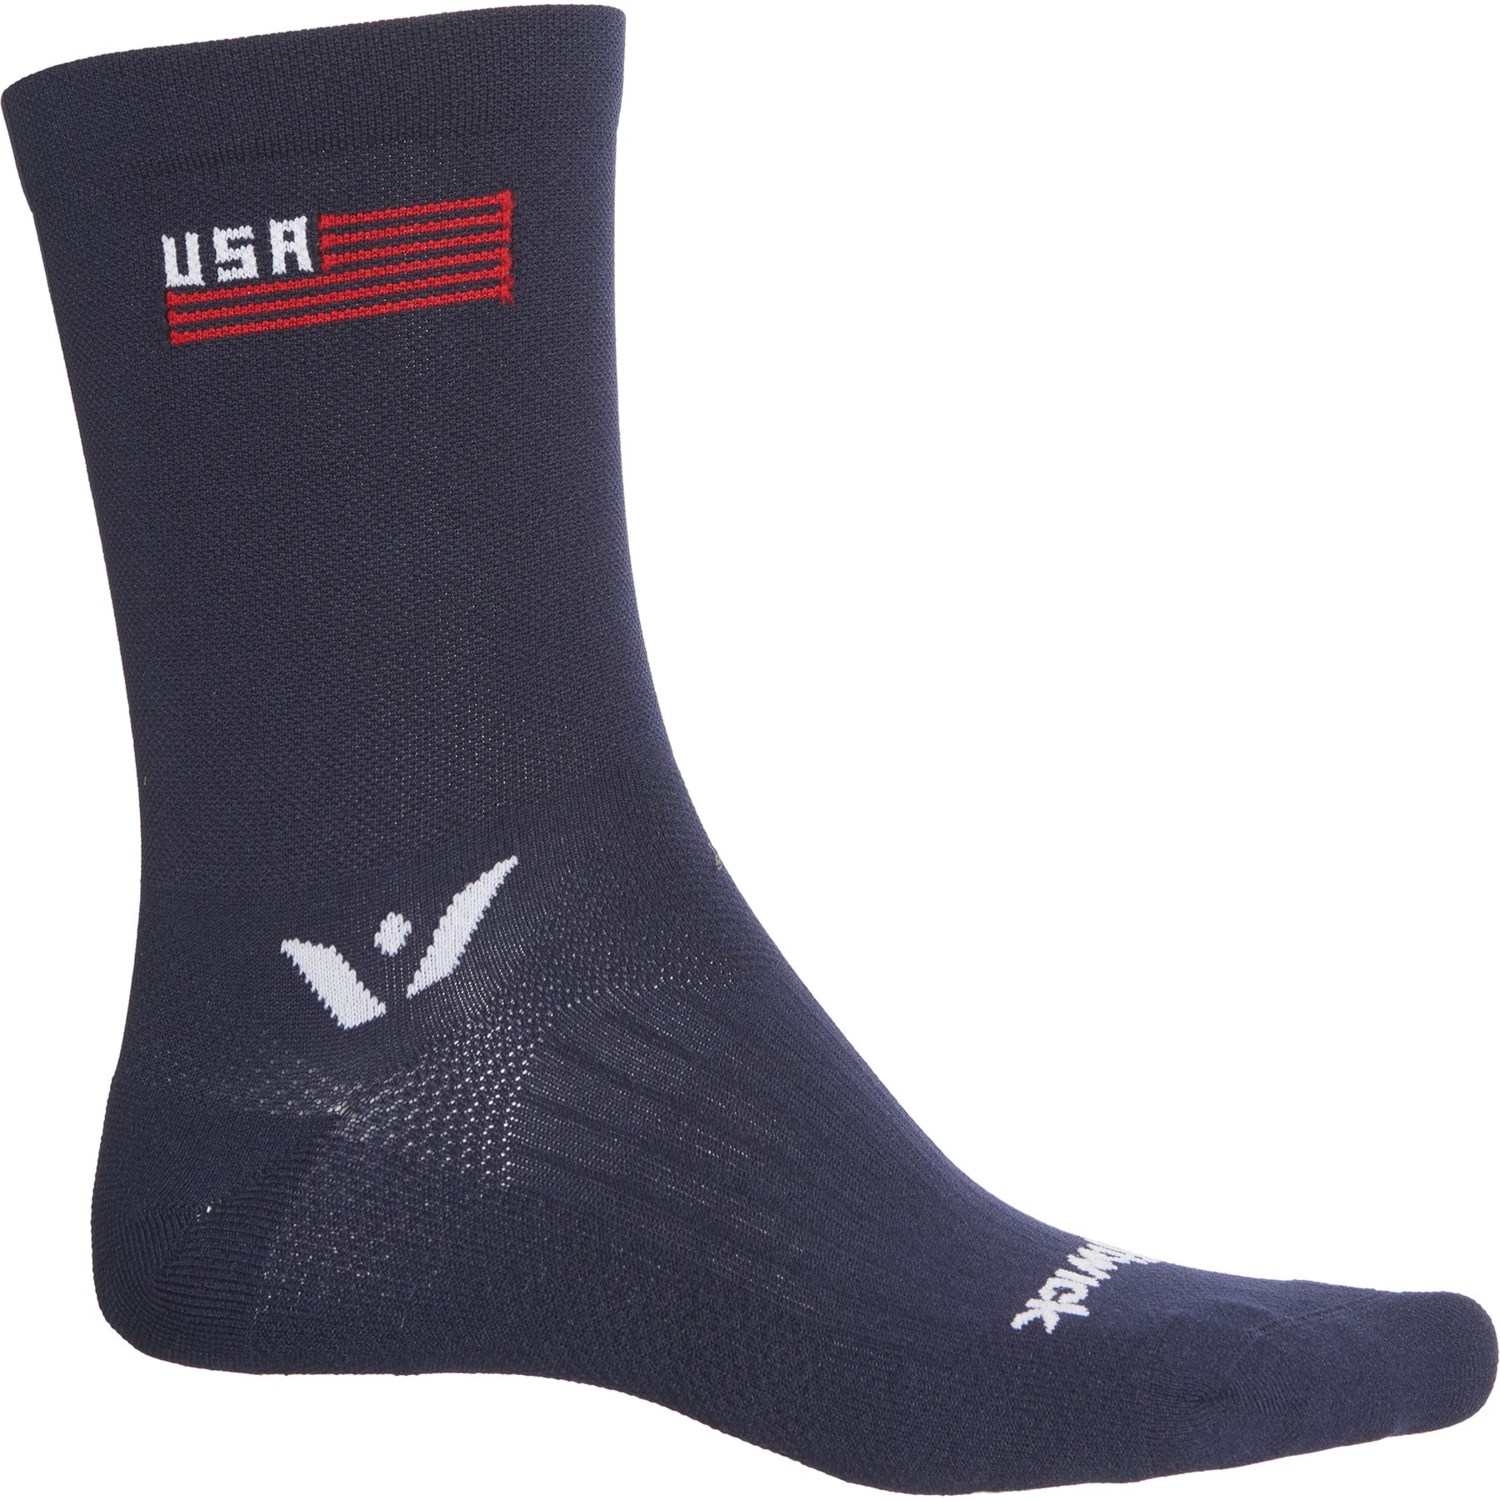 Swiftwick VISION Five Tribute Cycling Socks - Crew (For Men and Women)